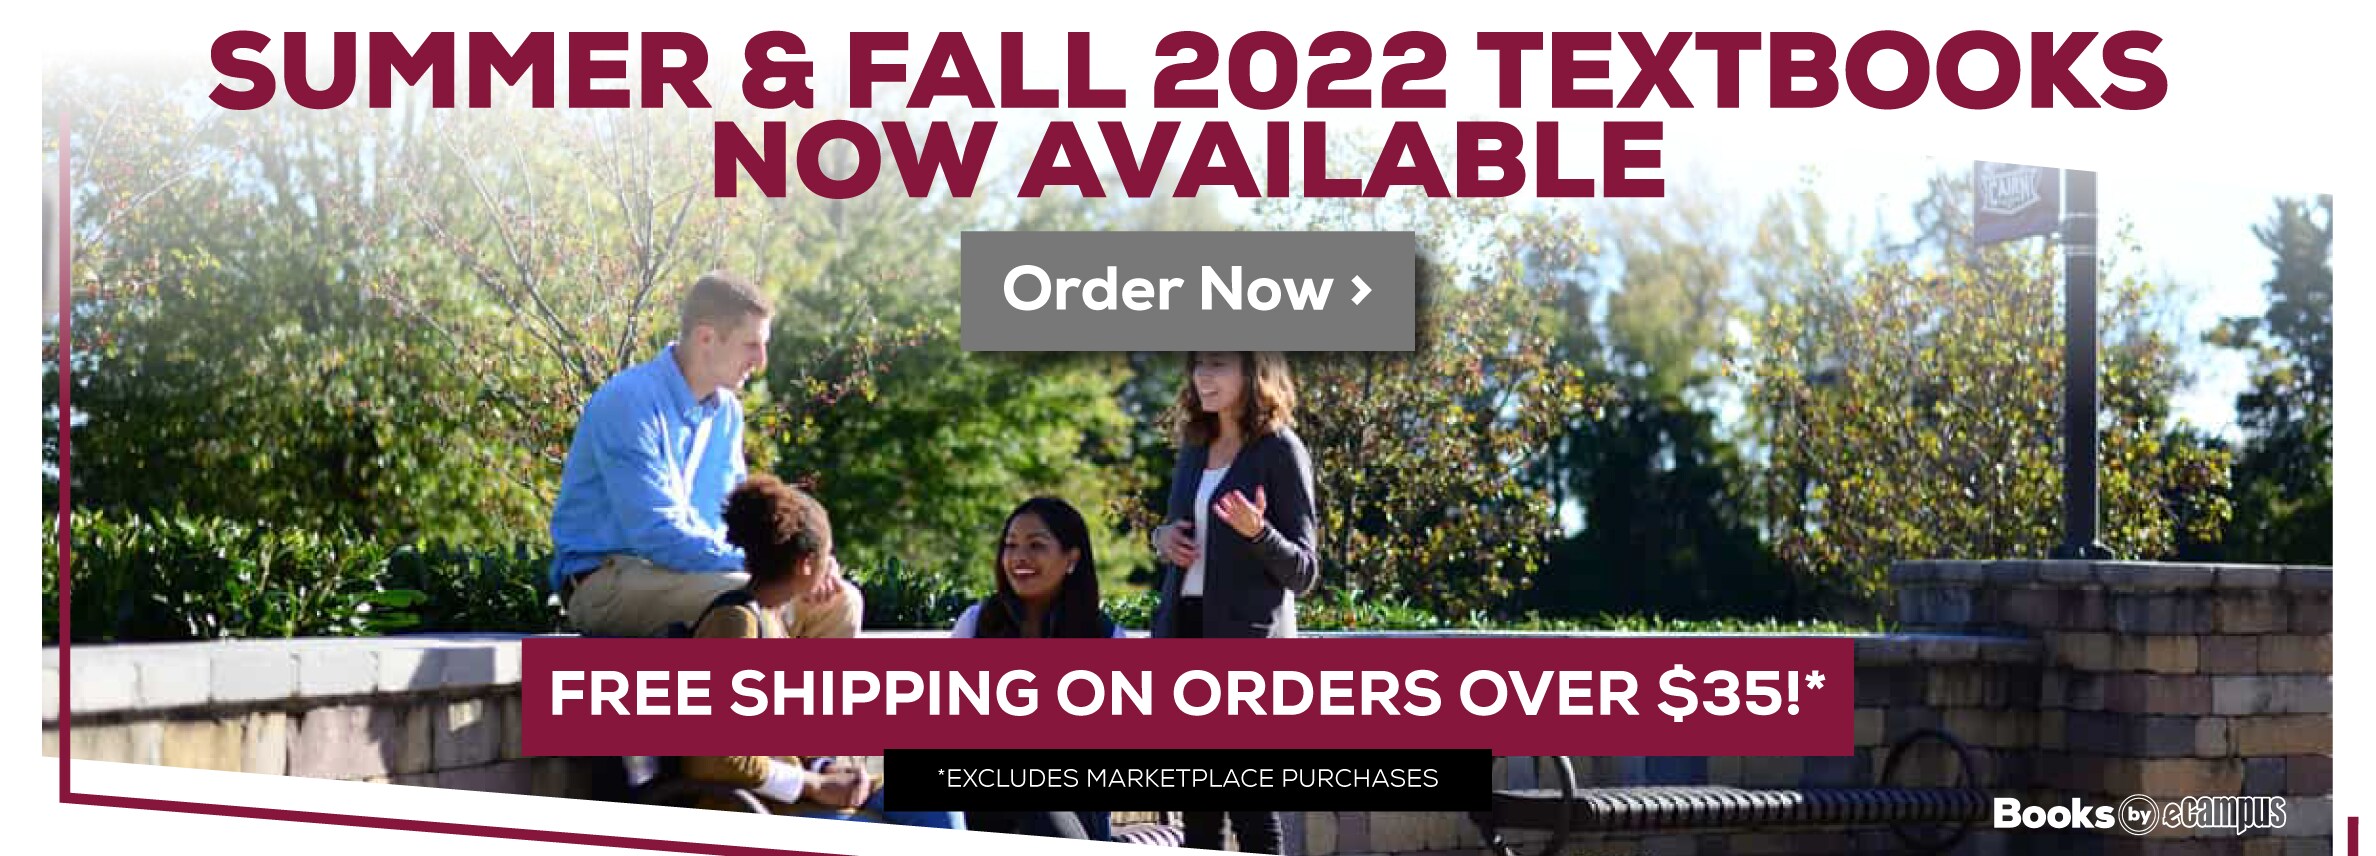 Summer and Fall 2022 Textbooks Now Available. Free shipping on all orders over $35! Excludes marketplace purchases. Order Now.